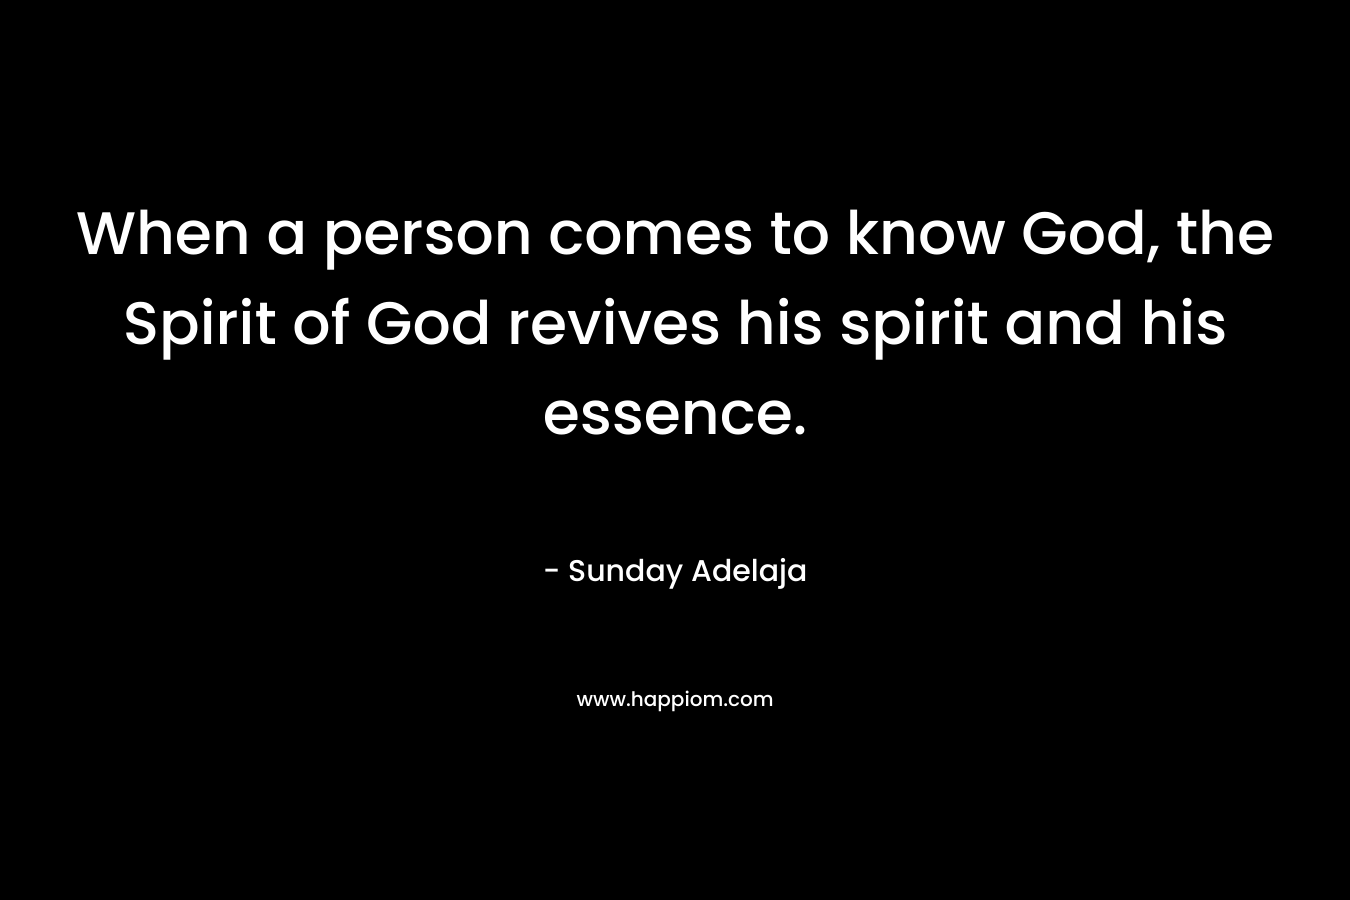 When a person comes to know God, the Spirit of God revives his spirit and his essence.